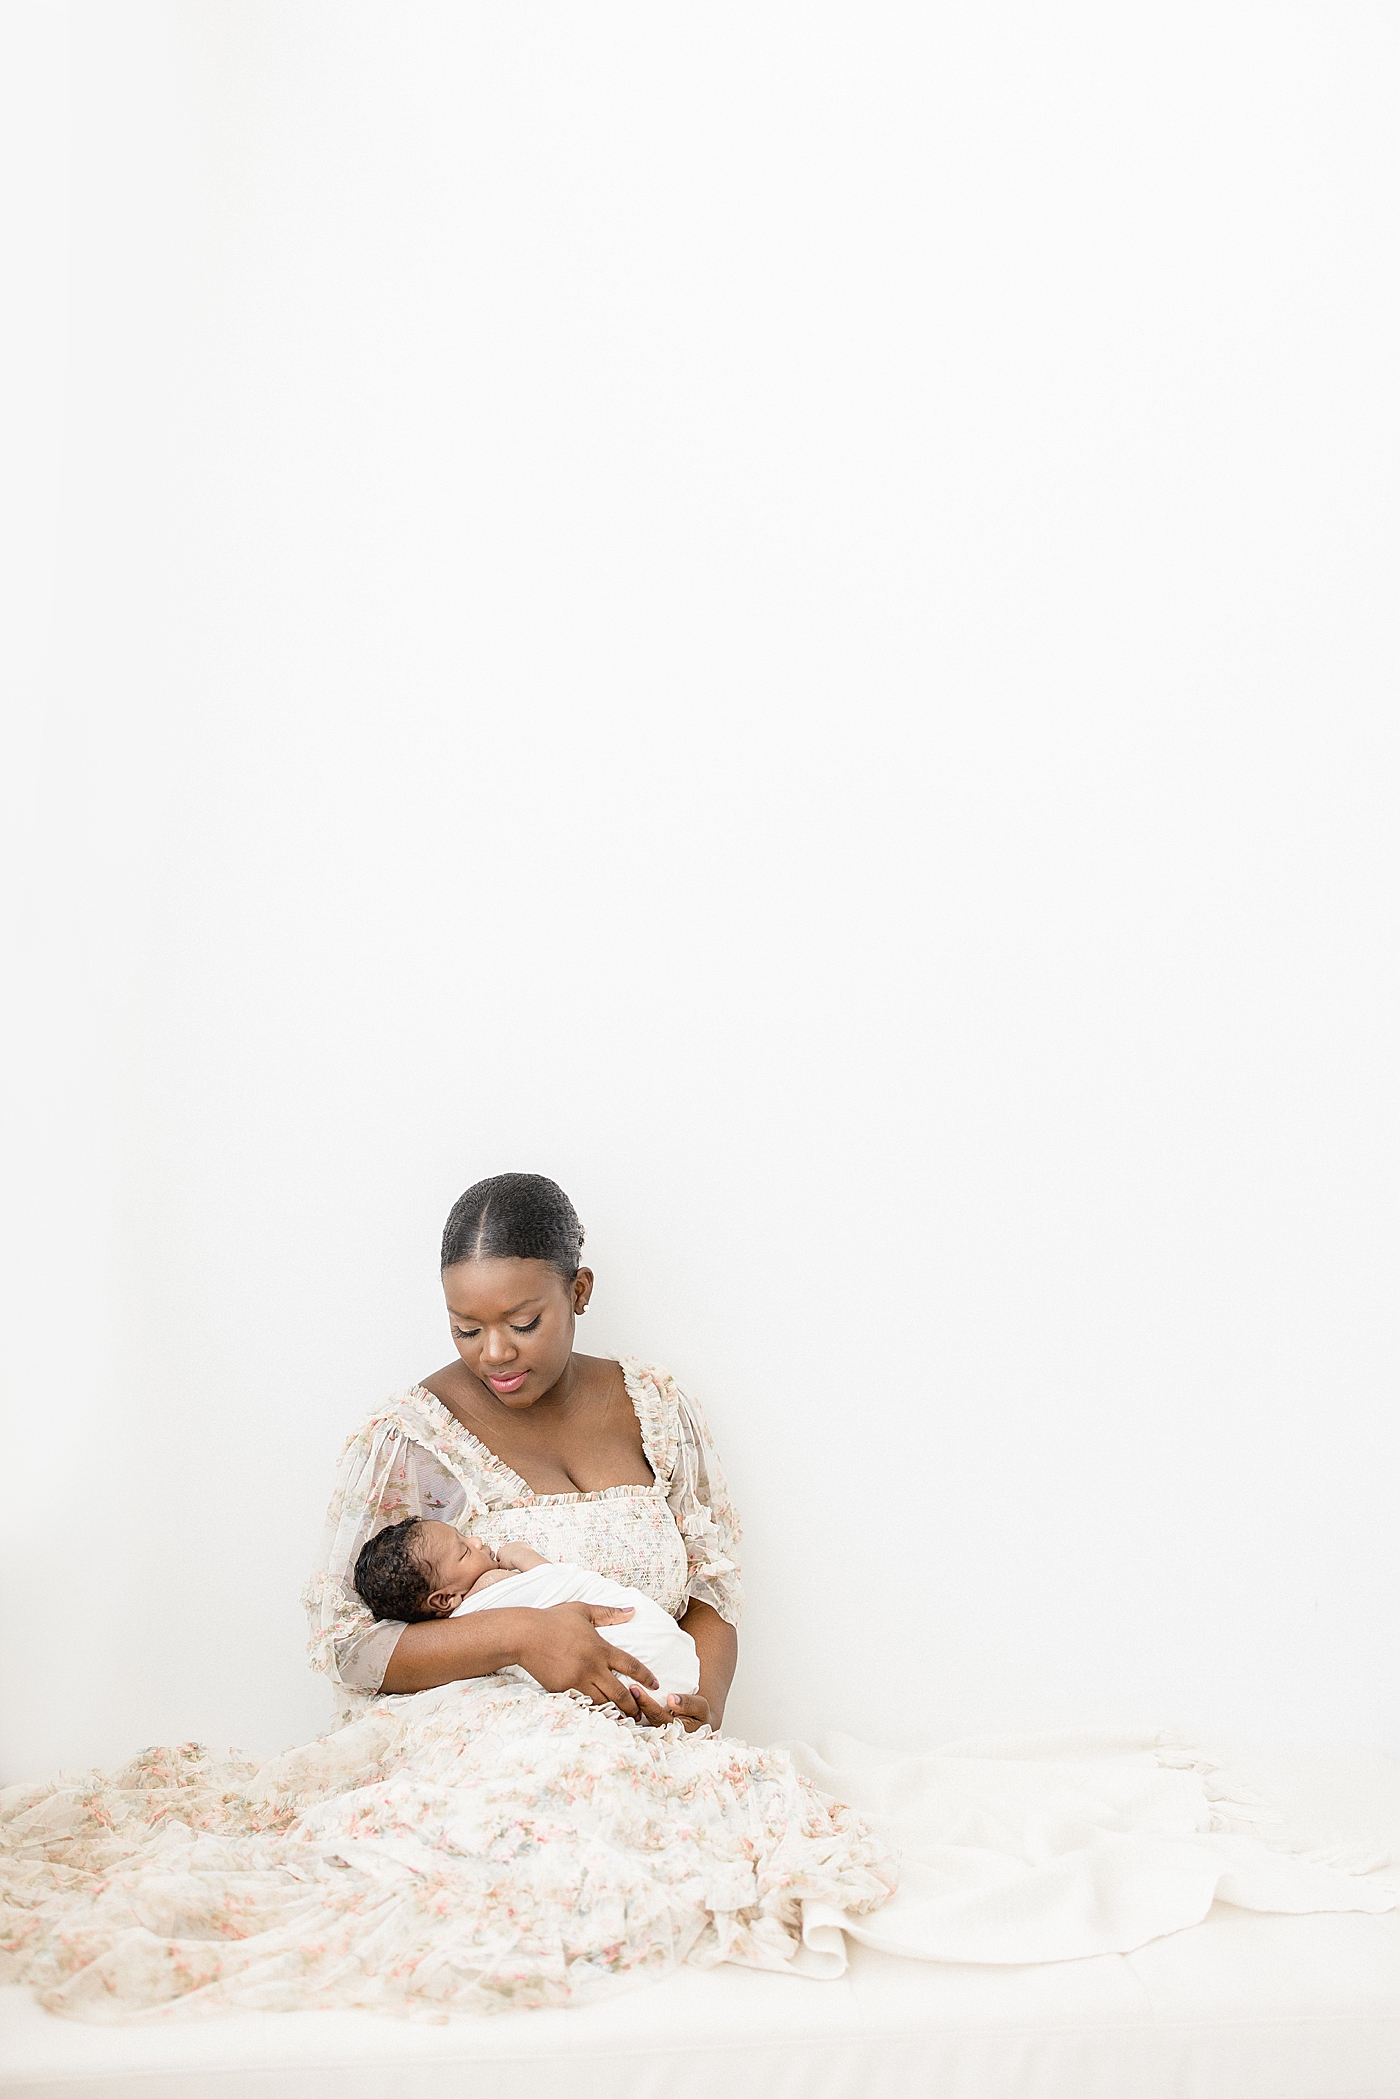 Mom wearing floral dress sitting on bed holding her newborn son. Photo by Brittany Elise Photography.